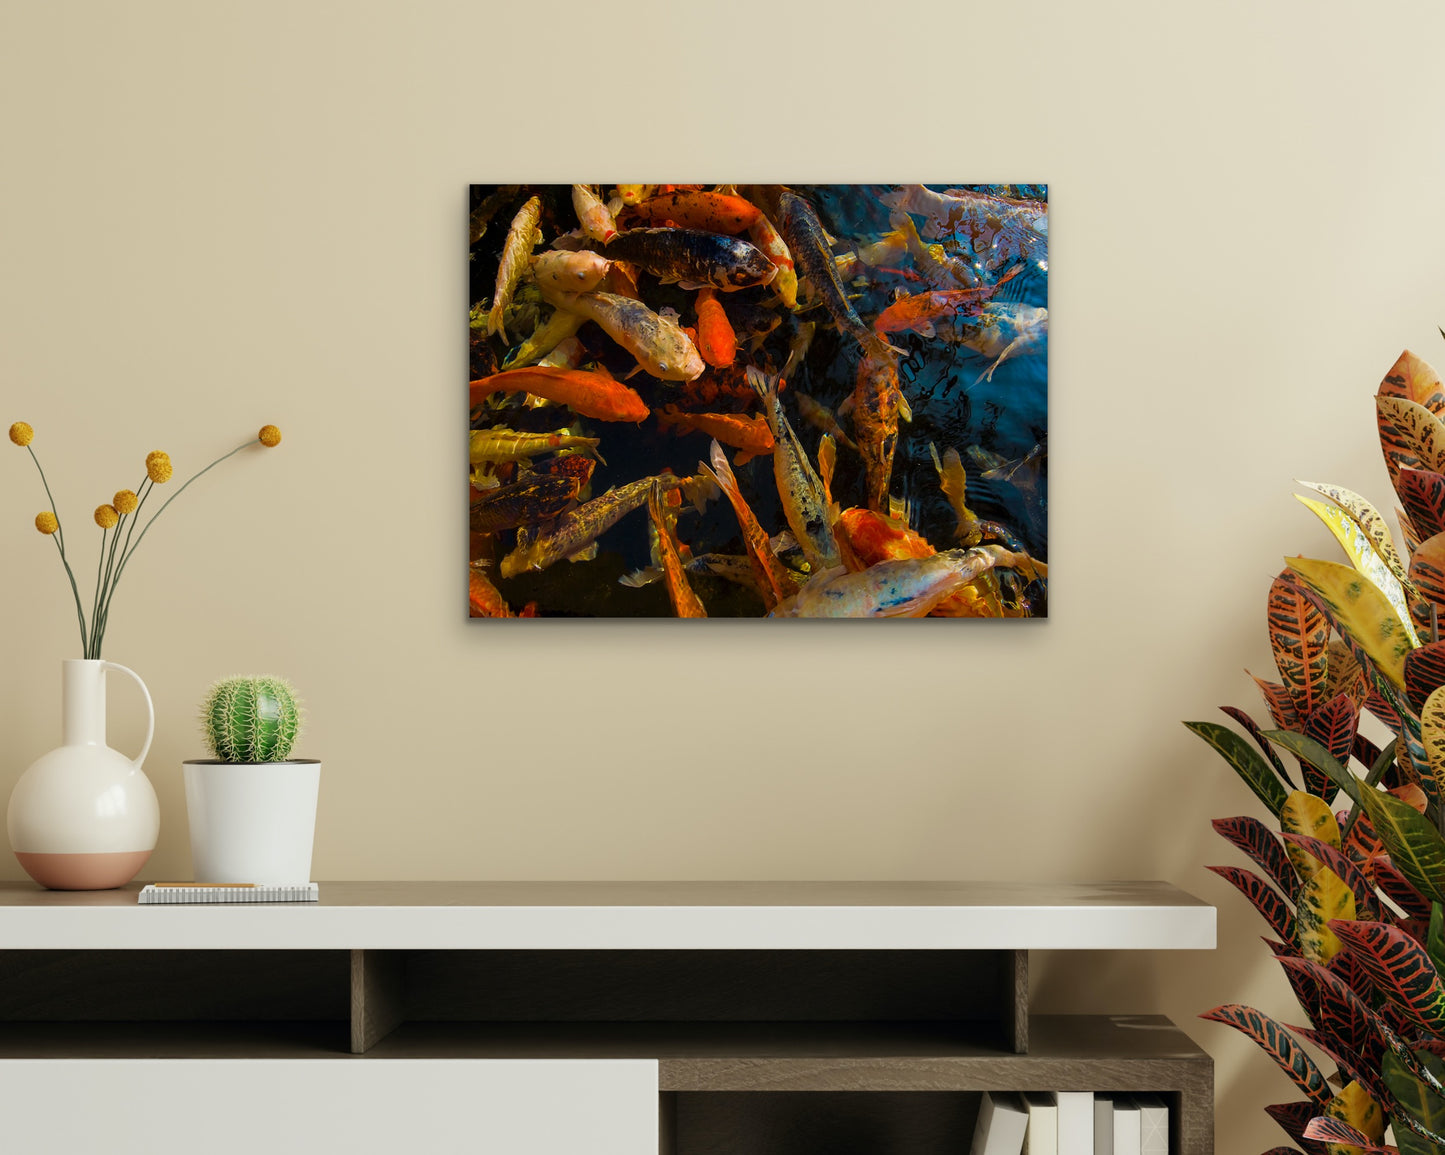 Wall demo of Koi Fish, a fine art photograph by Inspiring Images Hawaii.